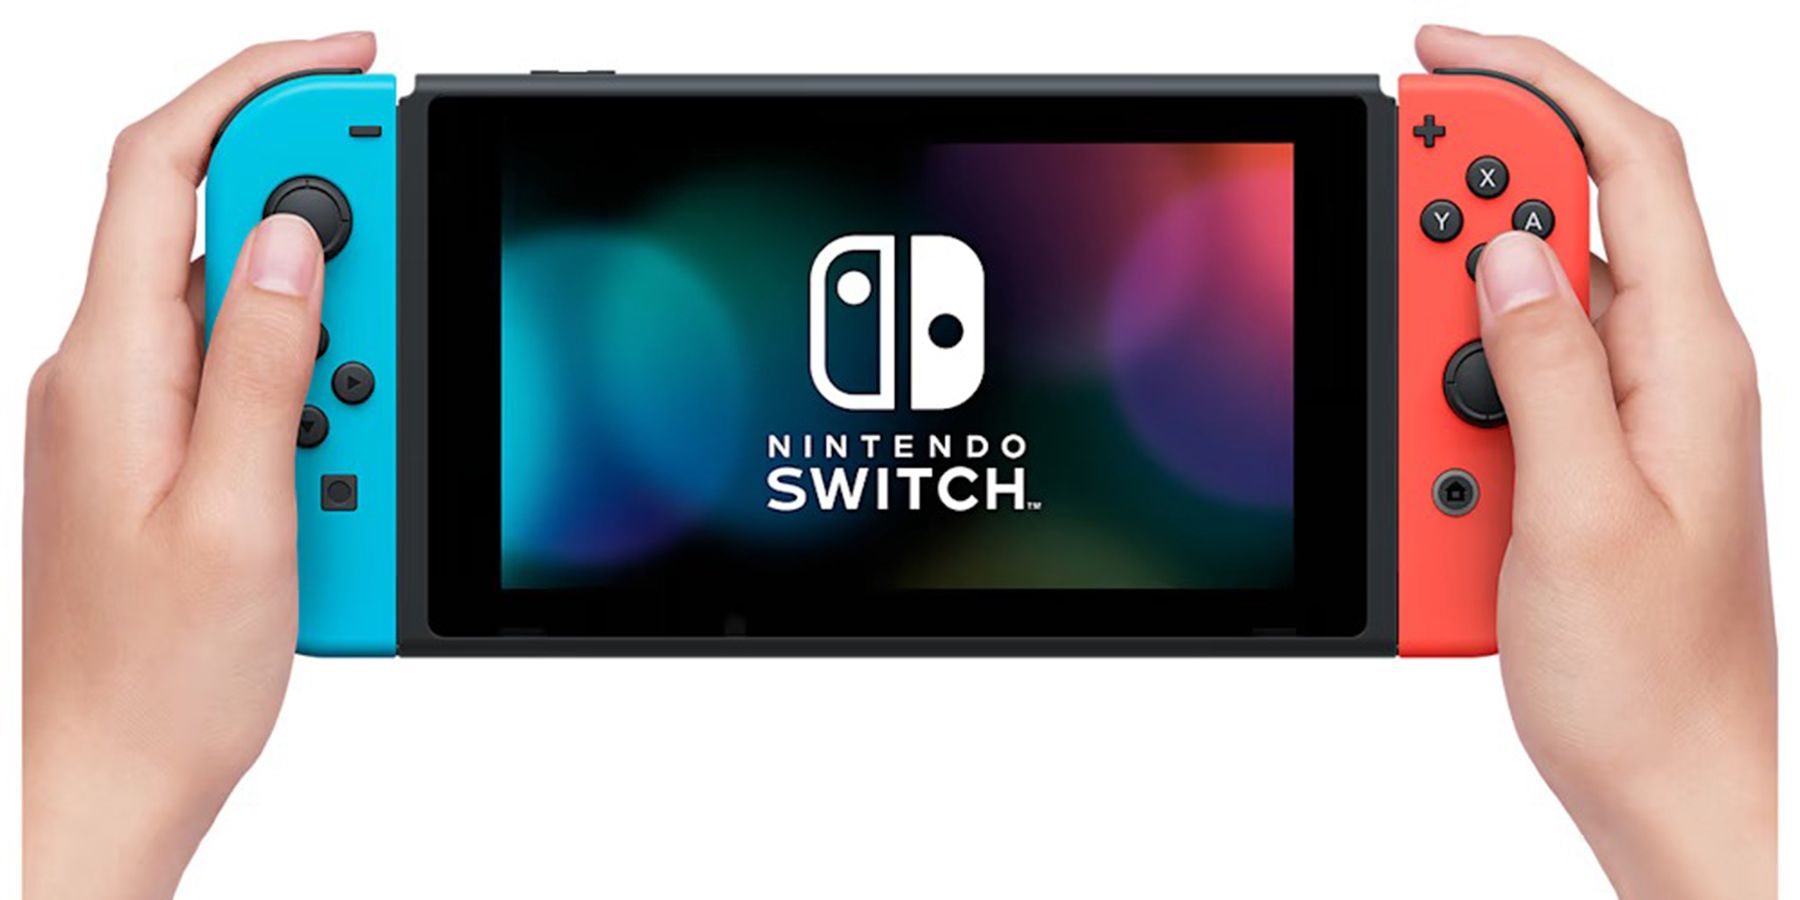 nintendo-switch-red-blue-hands